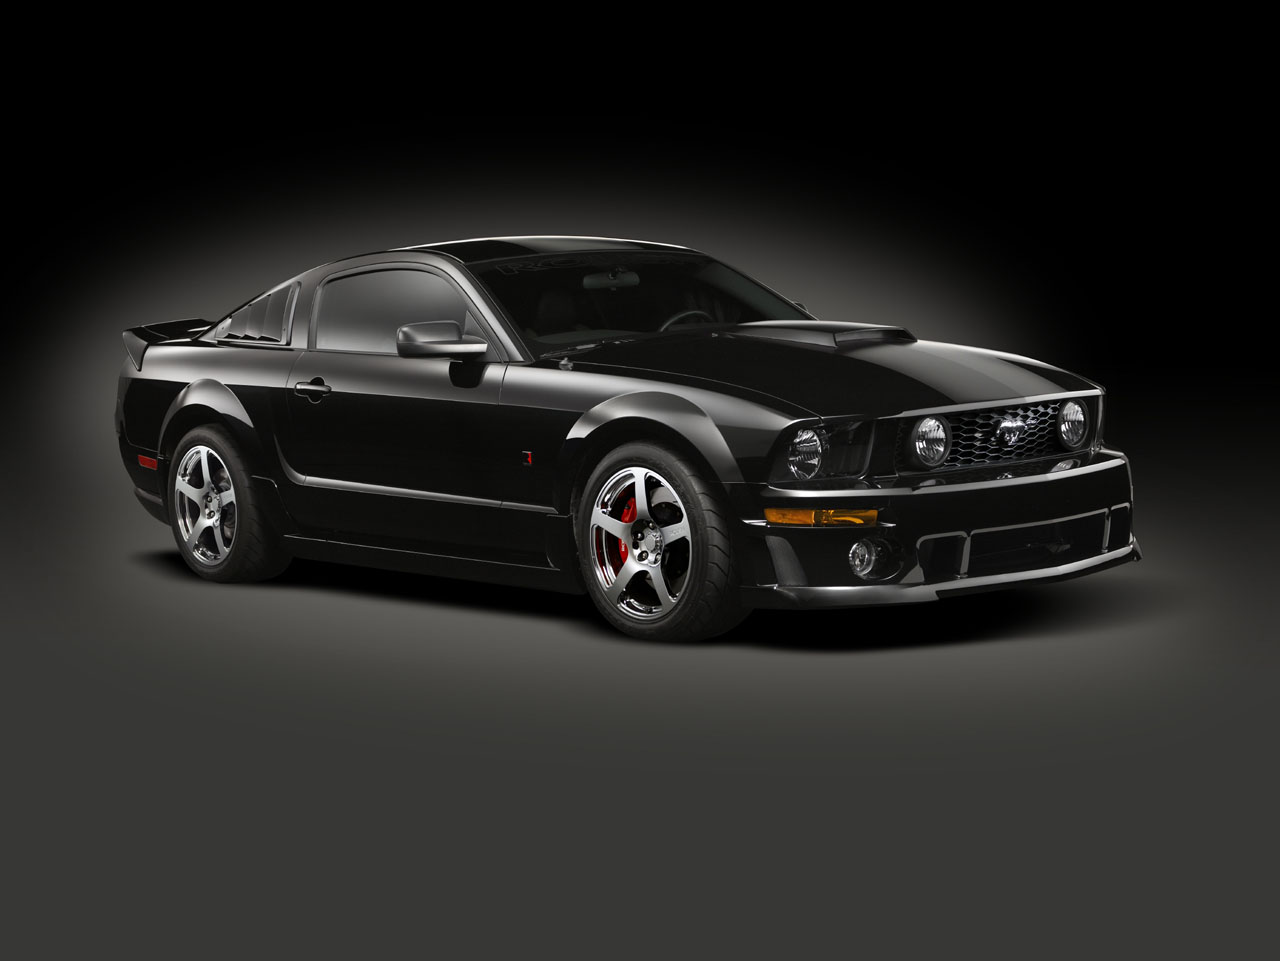 Ford Mustang Wallpaper 6066 Hd Wallpapers in Cars   Imagescicom 1280x961